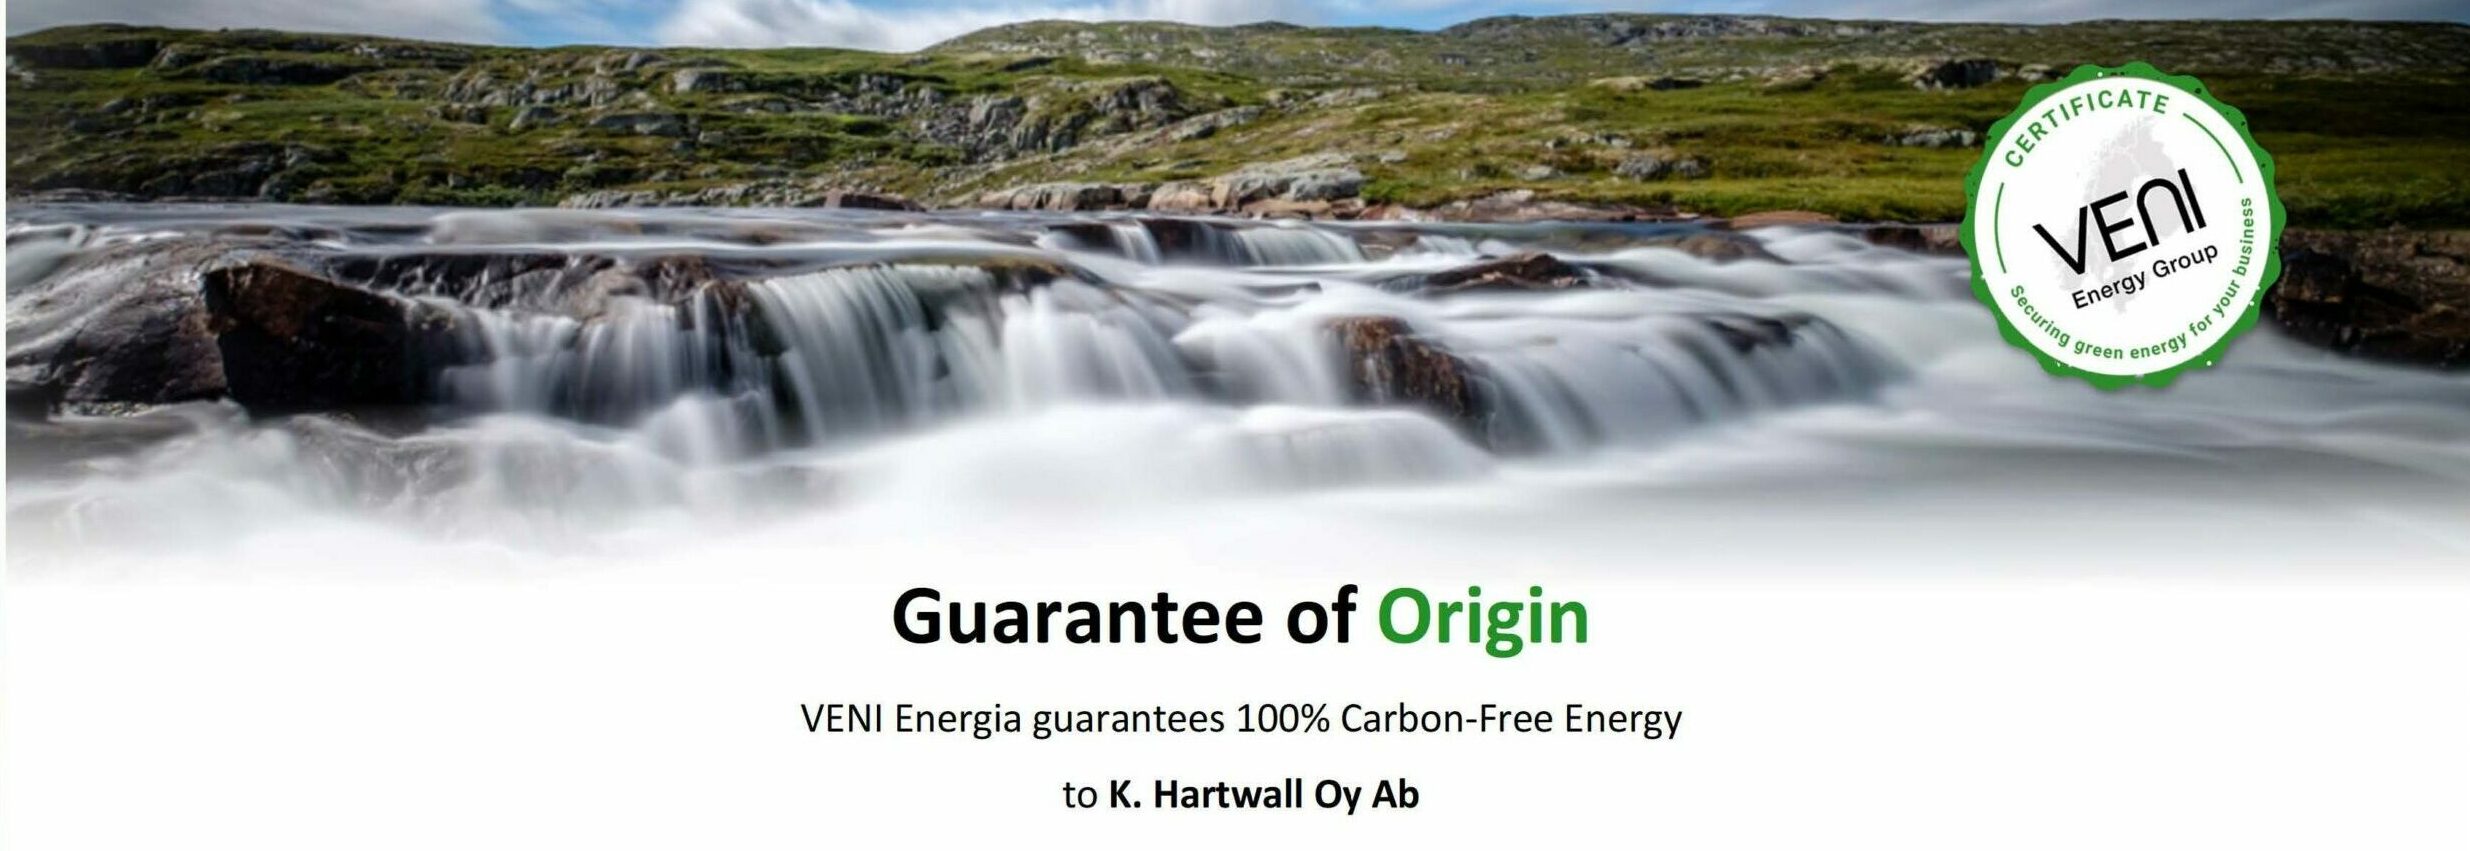 K.Hartwall receives the certificate for 100% carbon-free energy